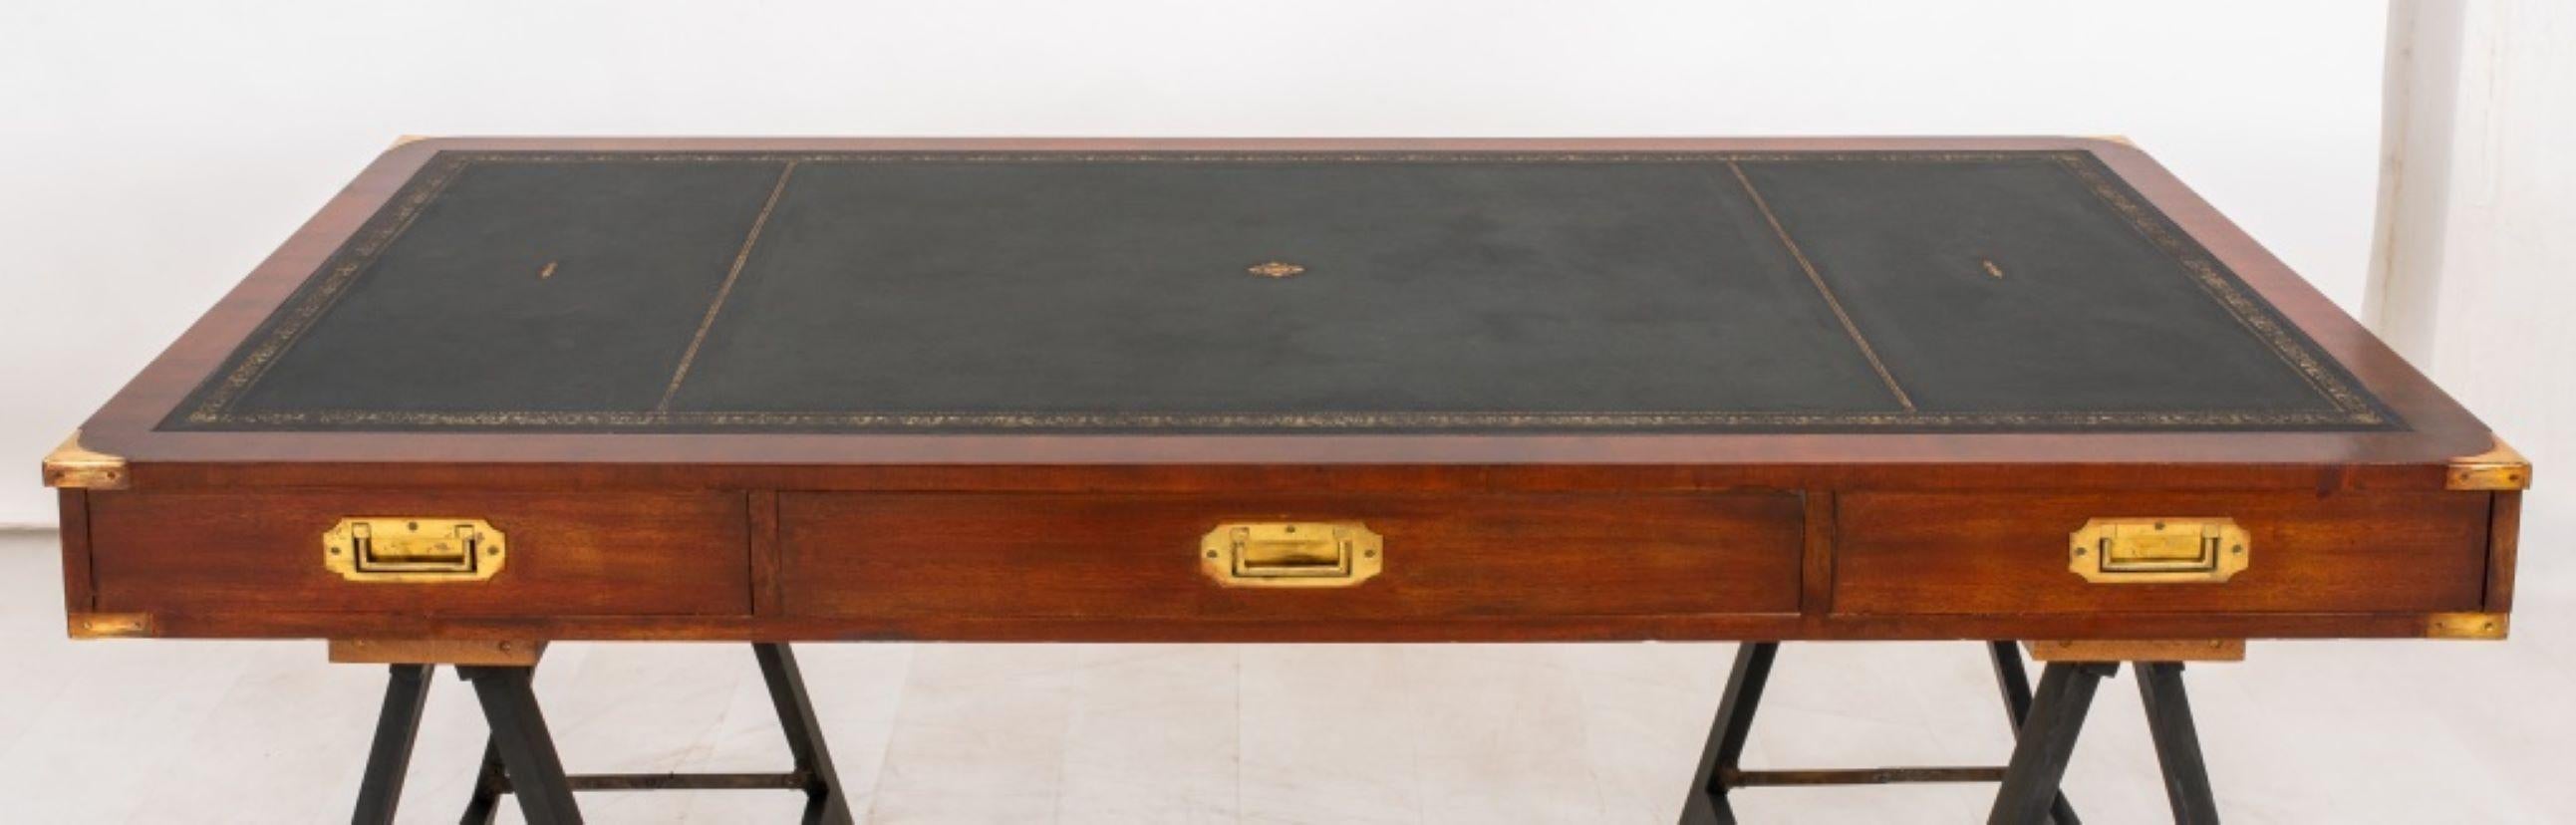 20th Century Bevan Funnell English Reprodux Campaign Desk For Sale